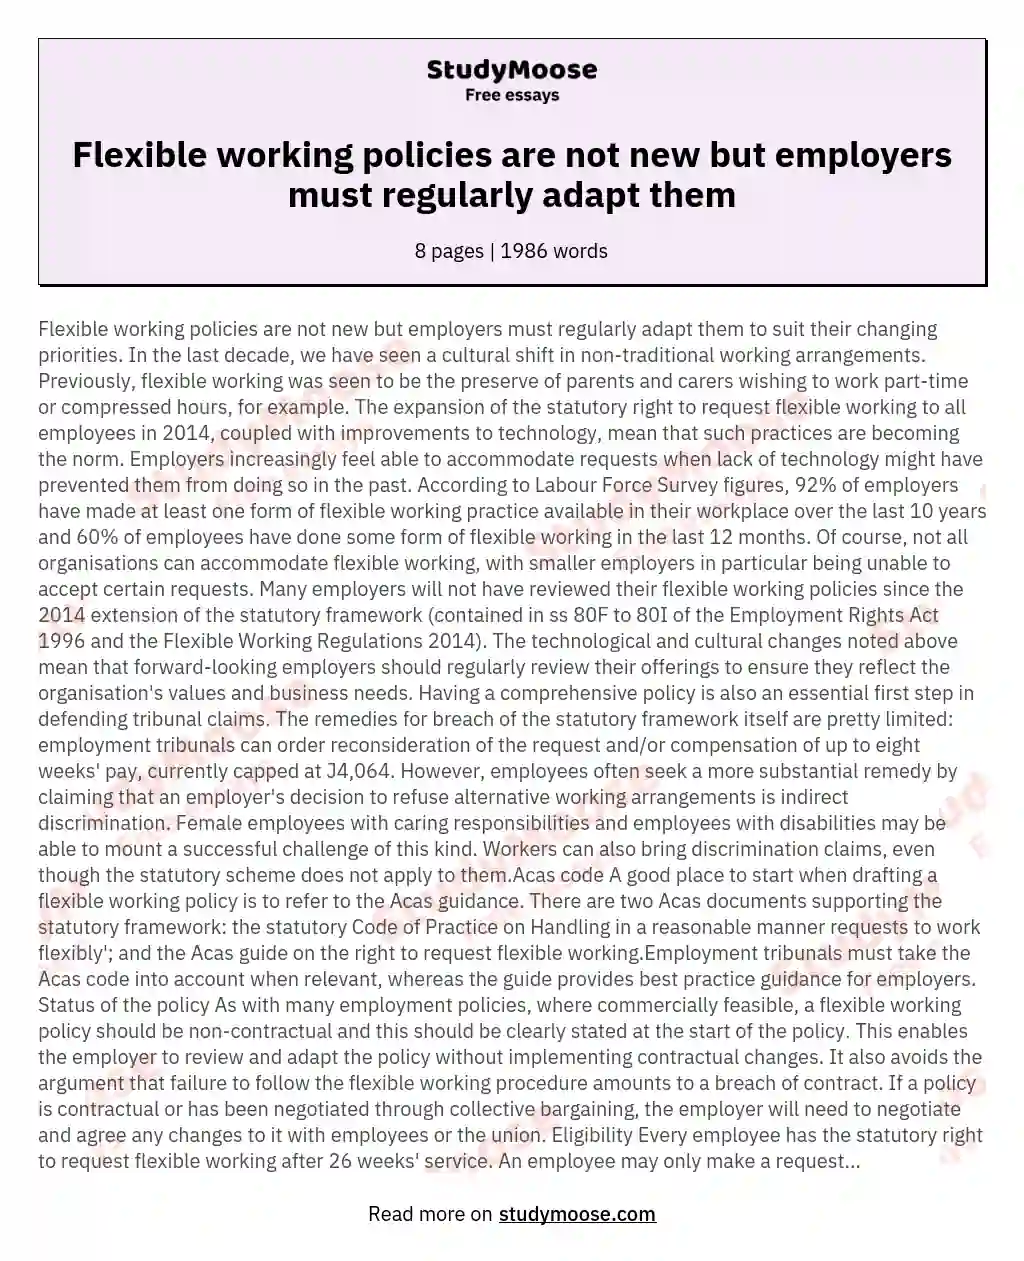 Flexible working policies are not new but employers must regularly adapt them